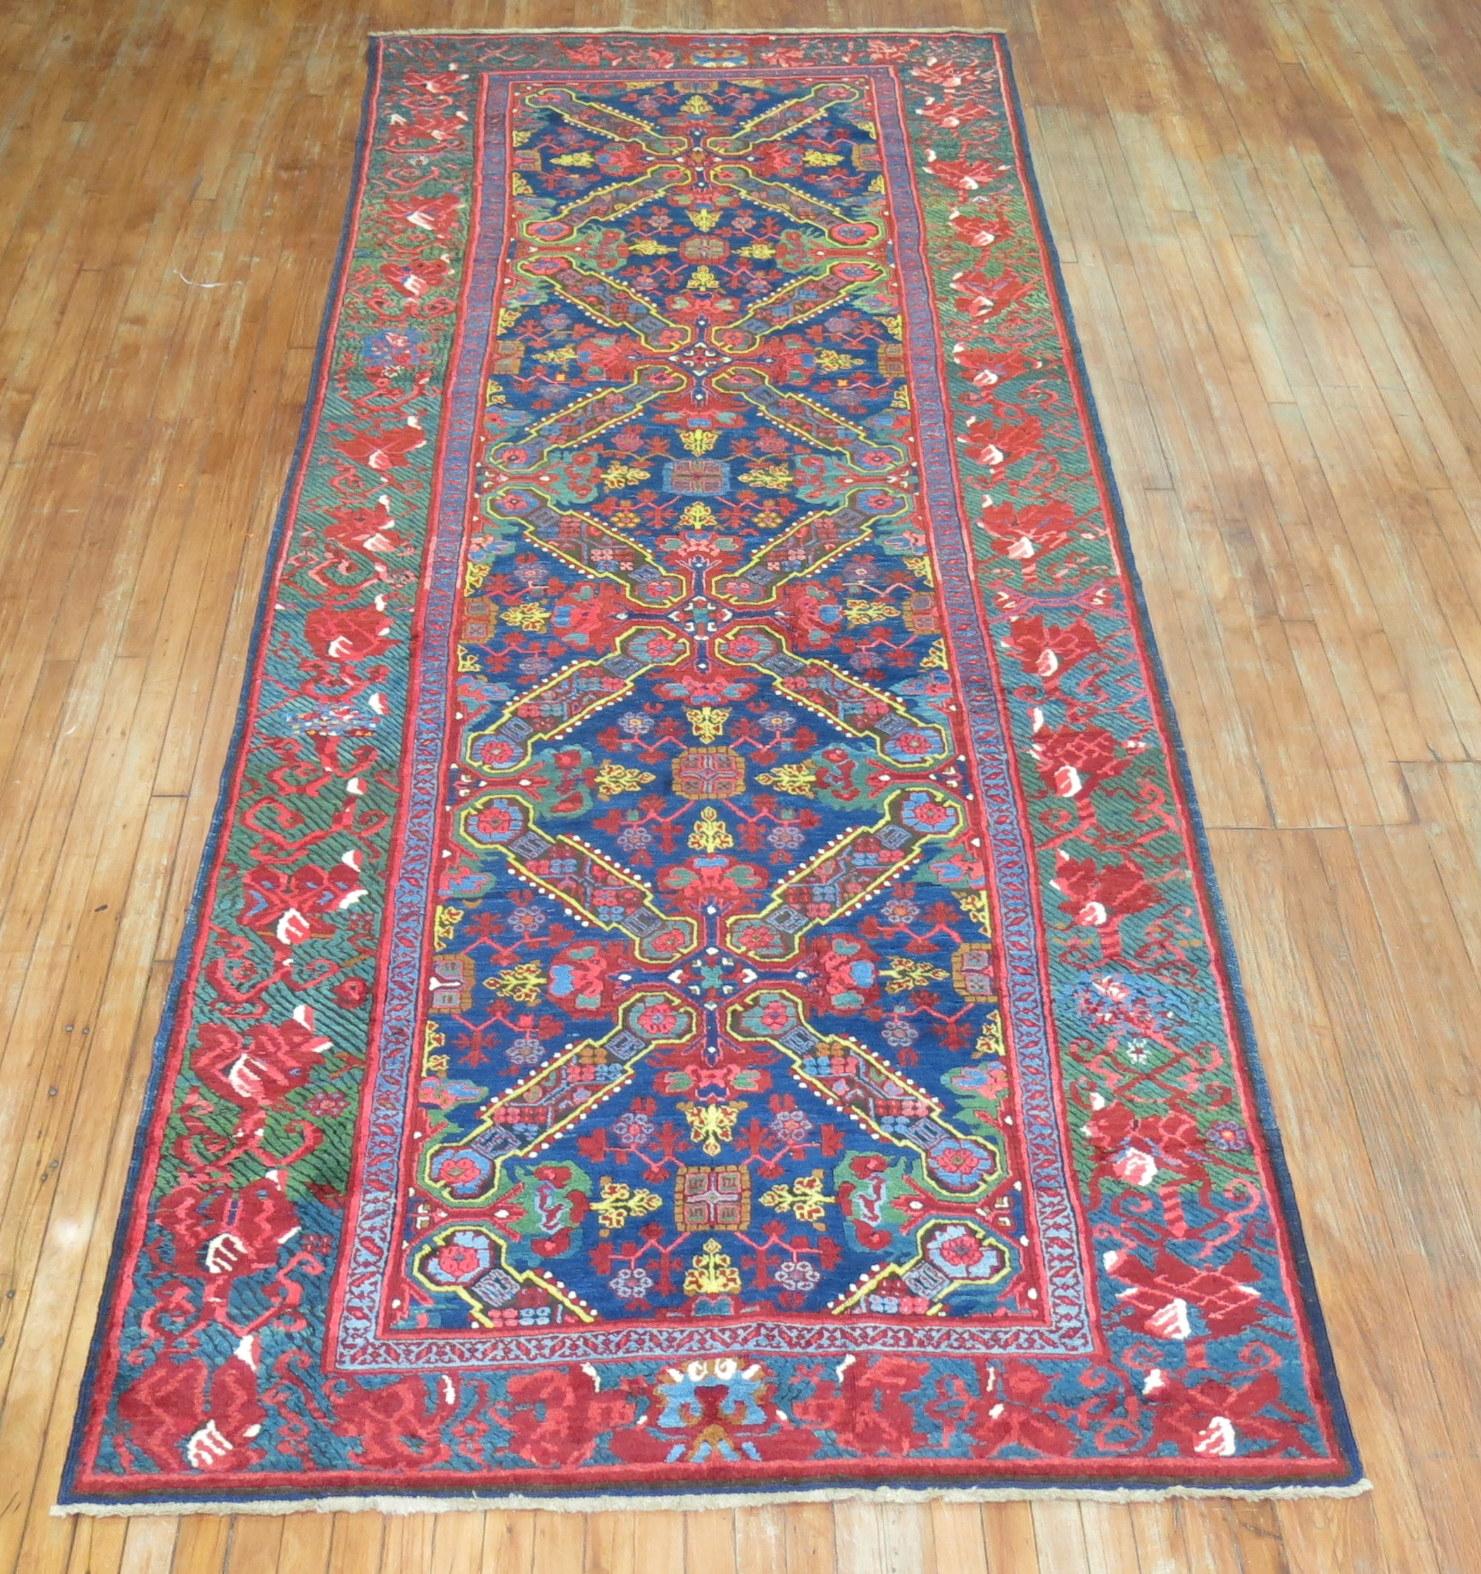 A spirited gallery size Karabagh rug with a zeychour keyhole design. Lustrous wool and jewel toned colors.